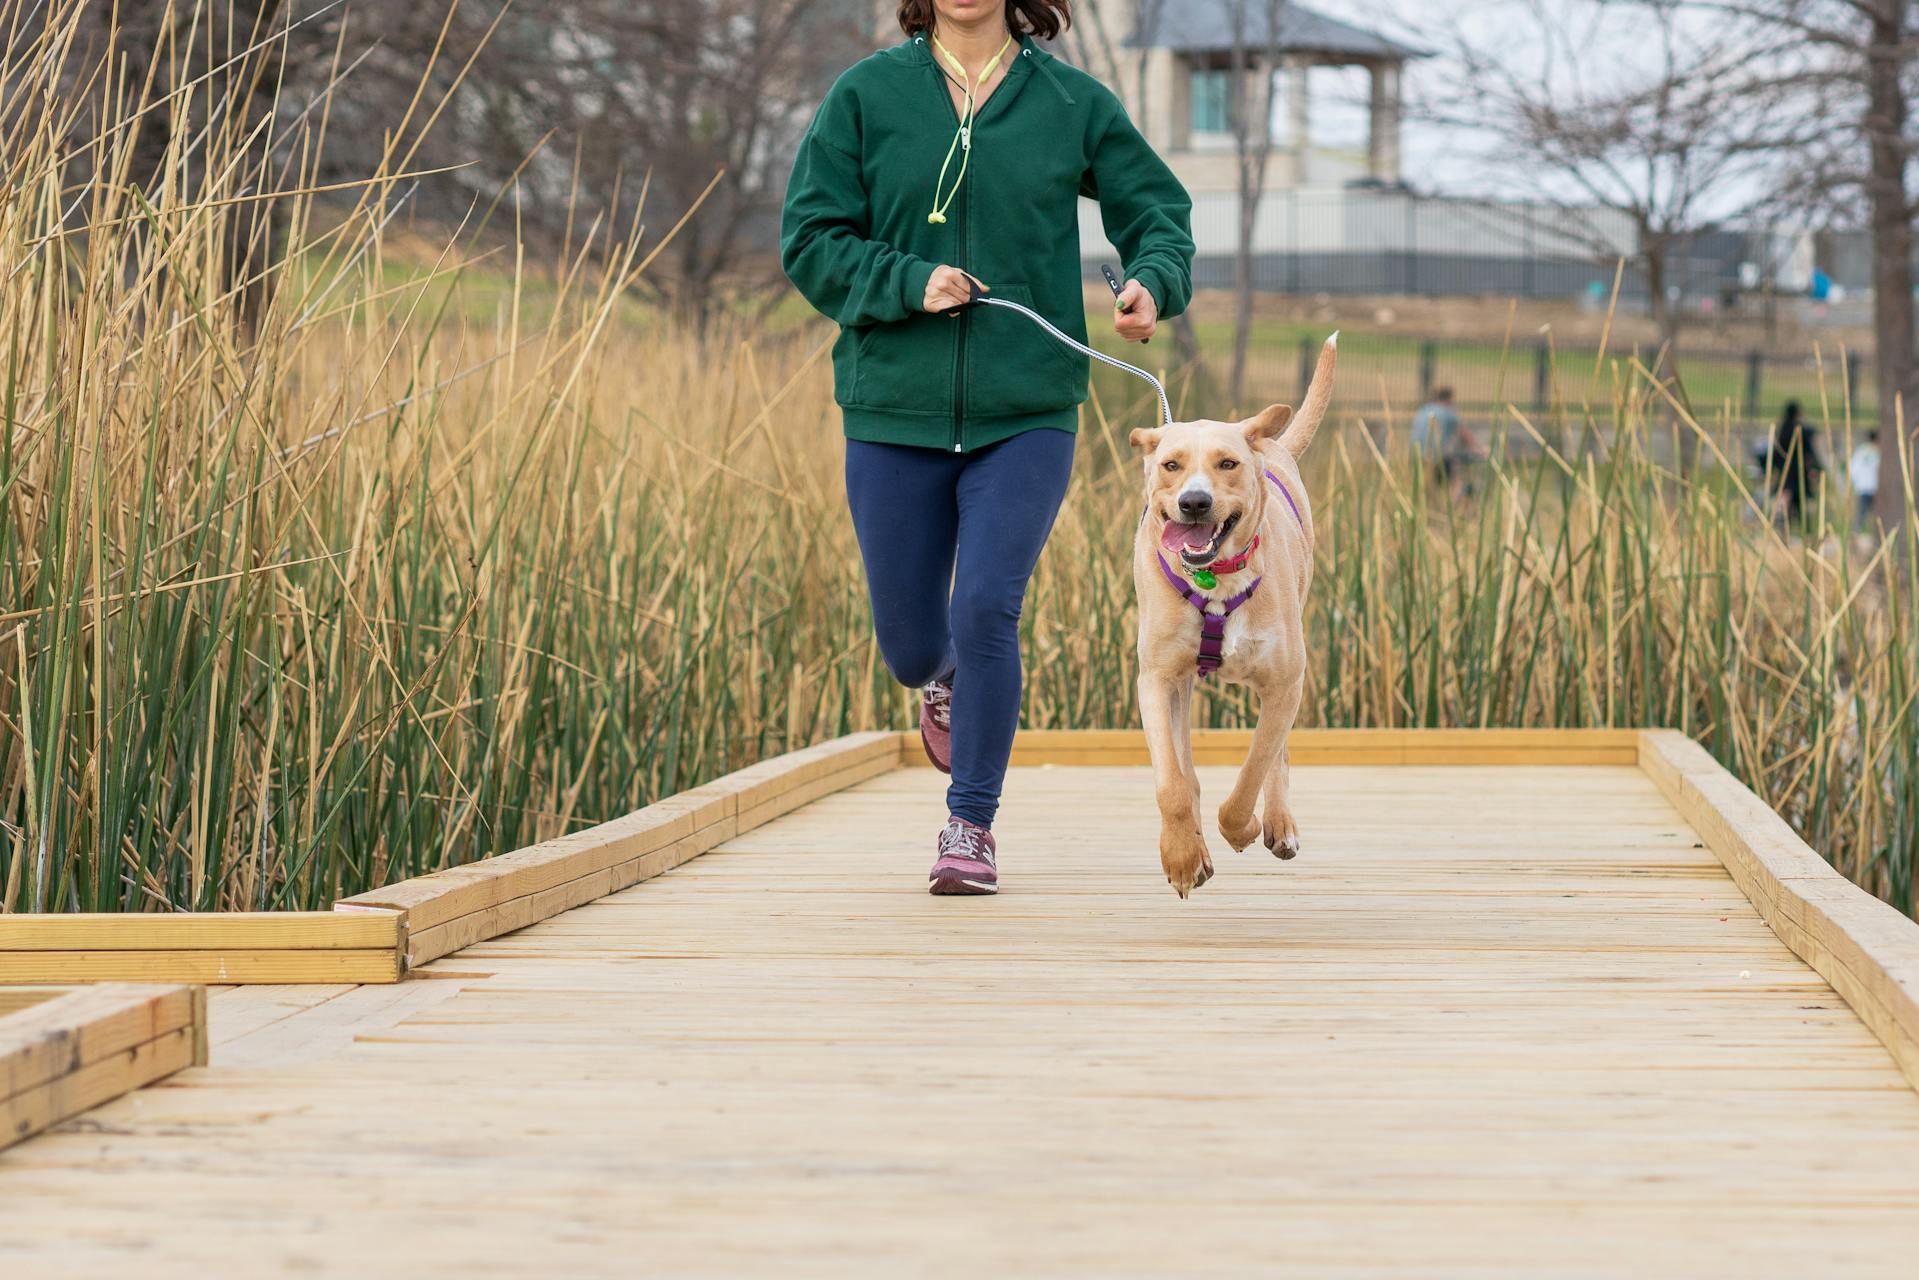 A woman running with a dog on leash